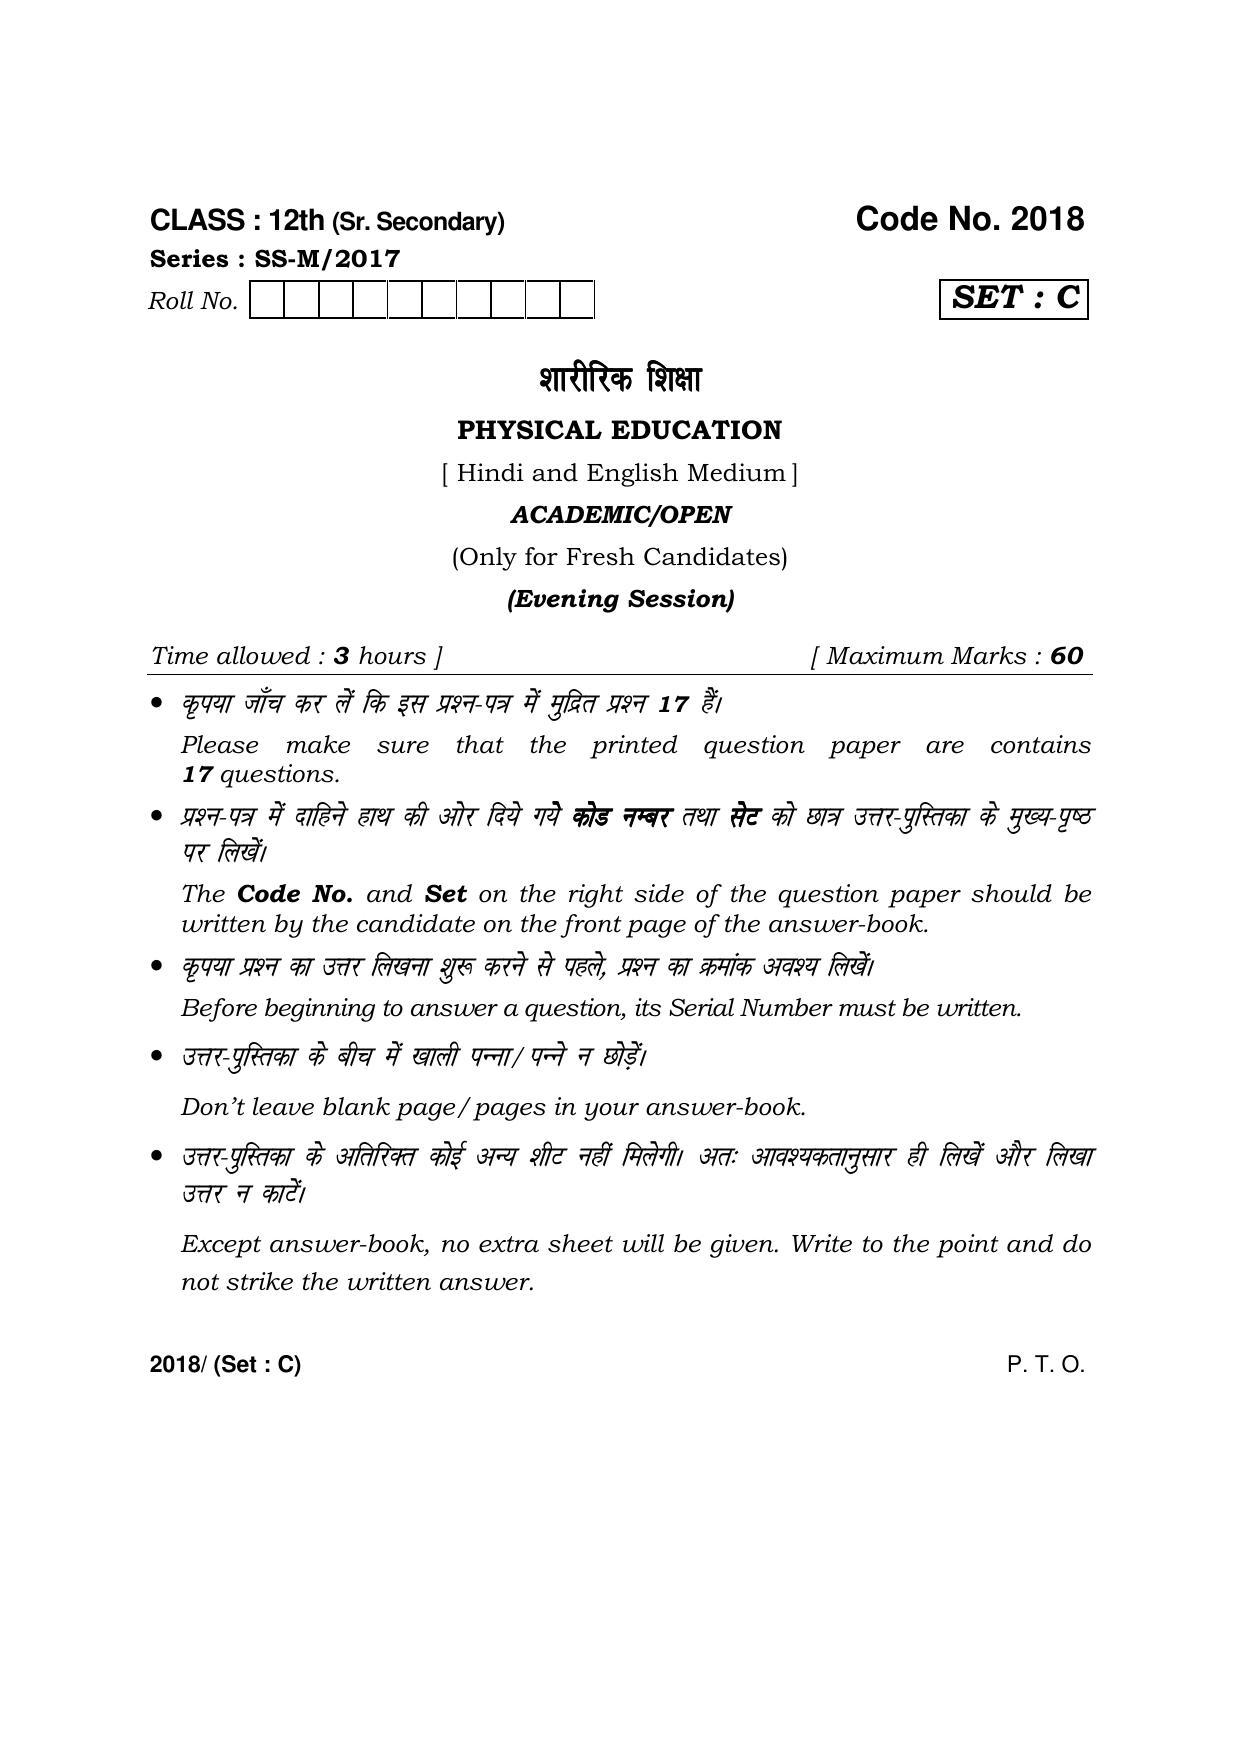 Haryana Board HBSE Class 12 Physical Education -C 2017 Question Paper - Page 1